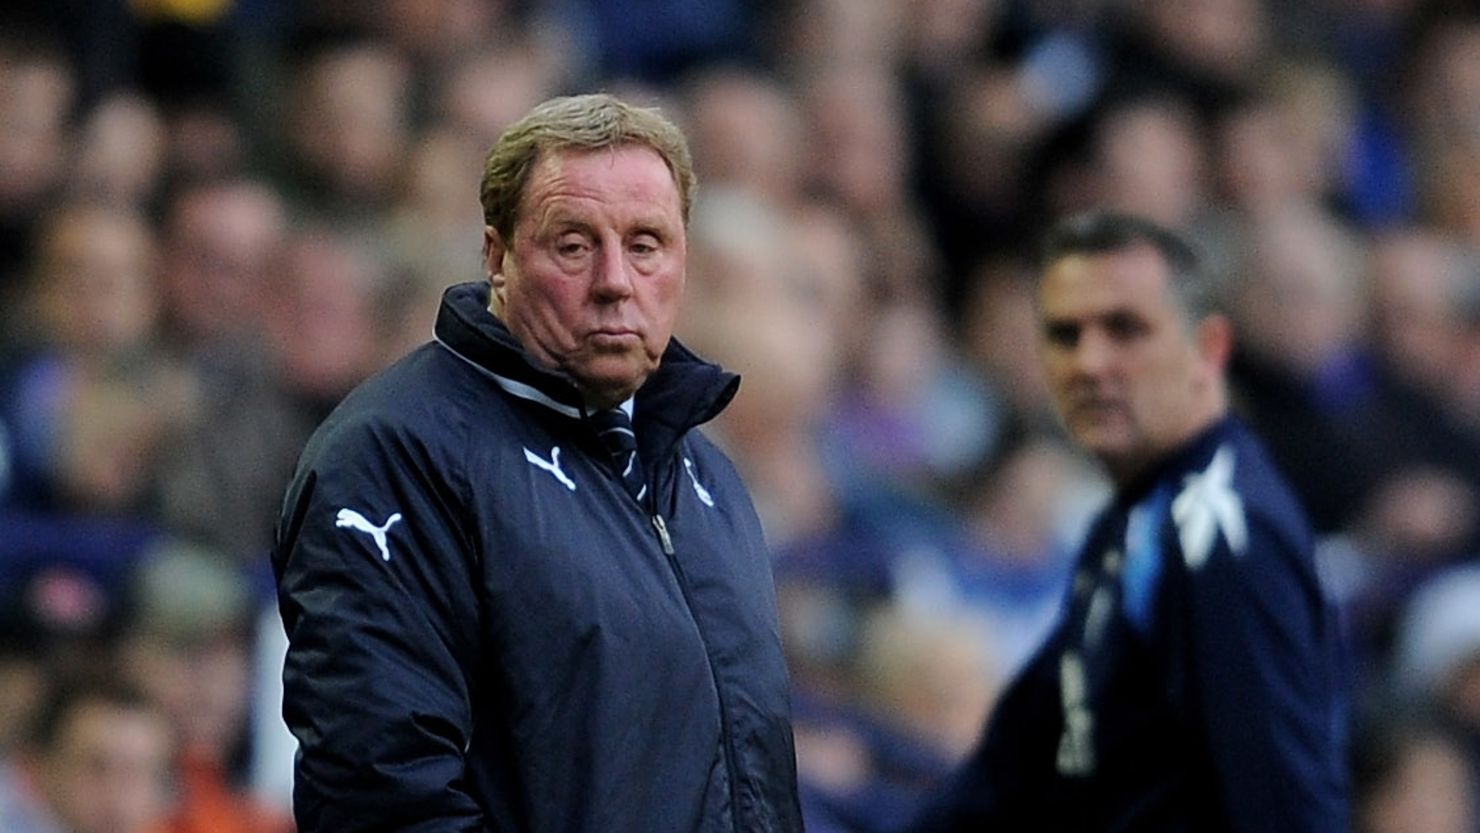 Harry Redknapp had spells with Bournemouth, West Ham United, Portsmouth and Southampton earlier in his career.